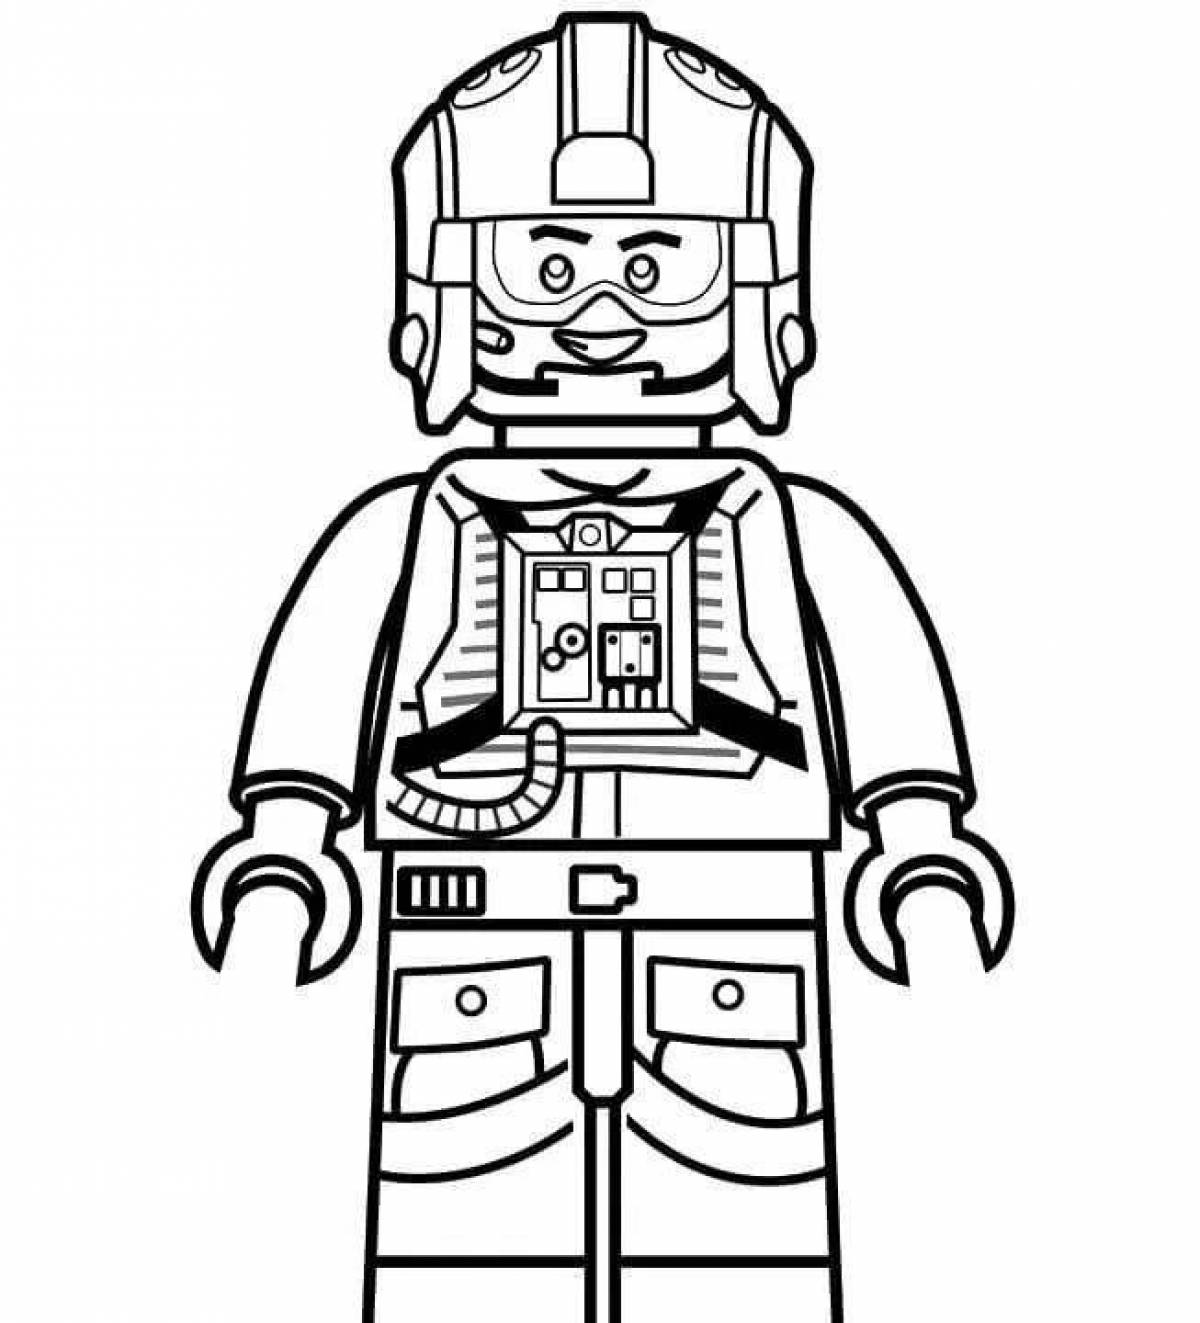 Radiant lego star wars coloring page